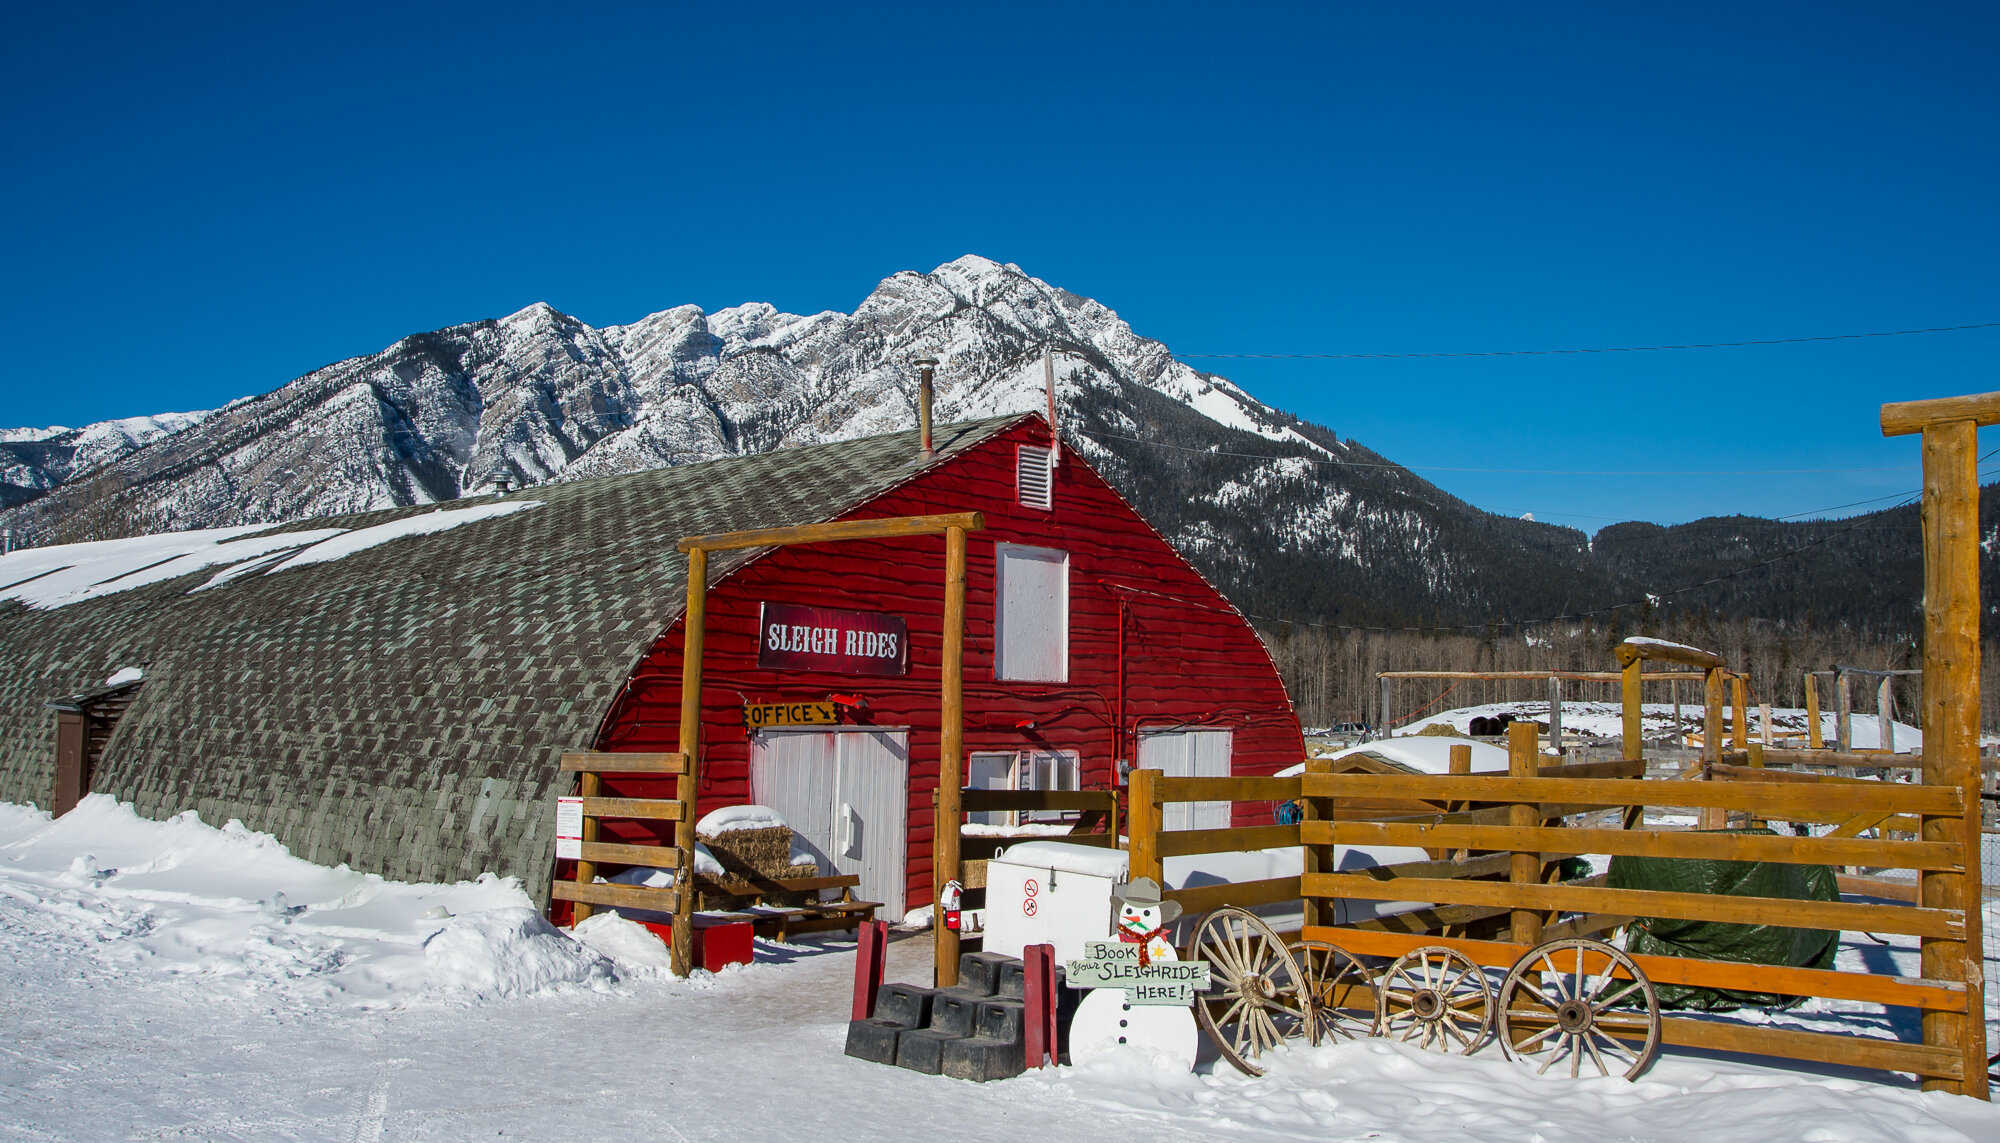 The Banff Warner Stables on a bluebird day with clear mountain views